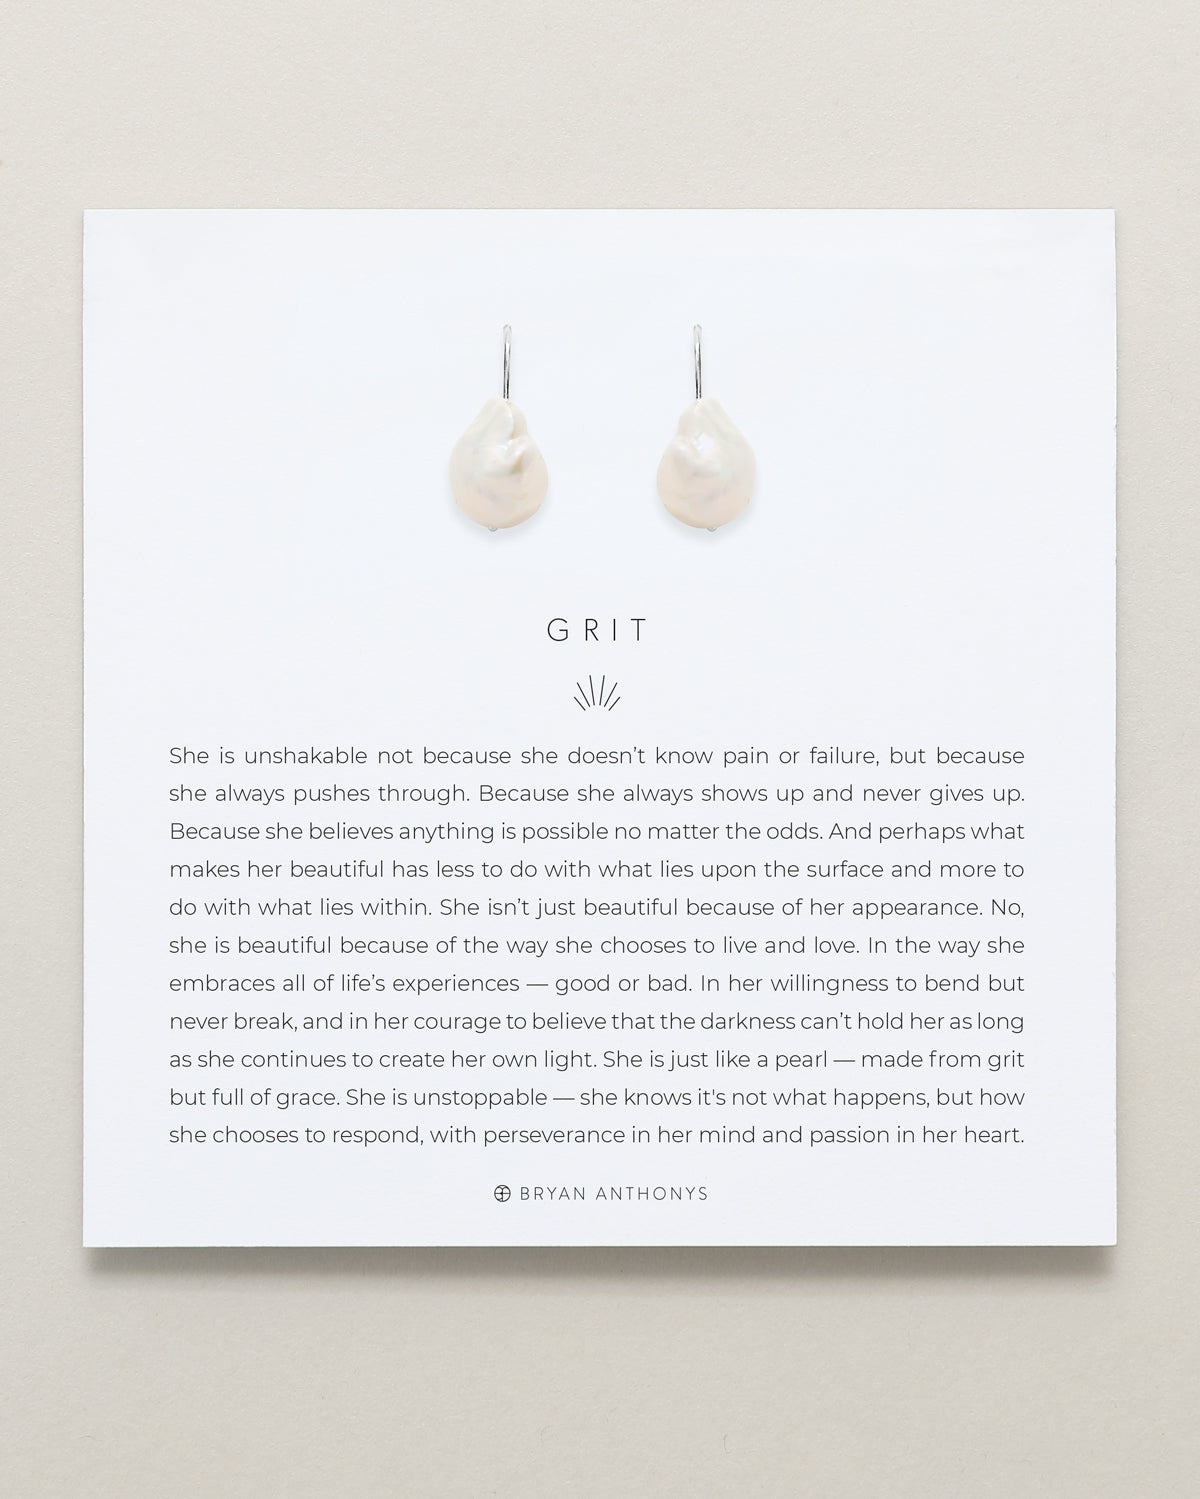 Bryan Anthonys Grit Silver Drop Earrings On Card